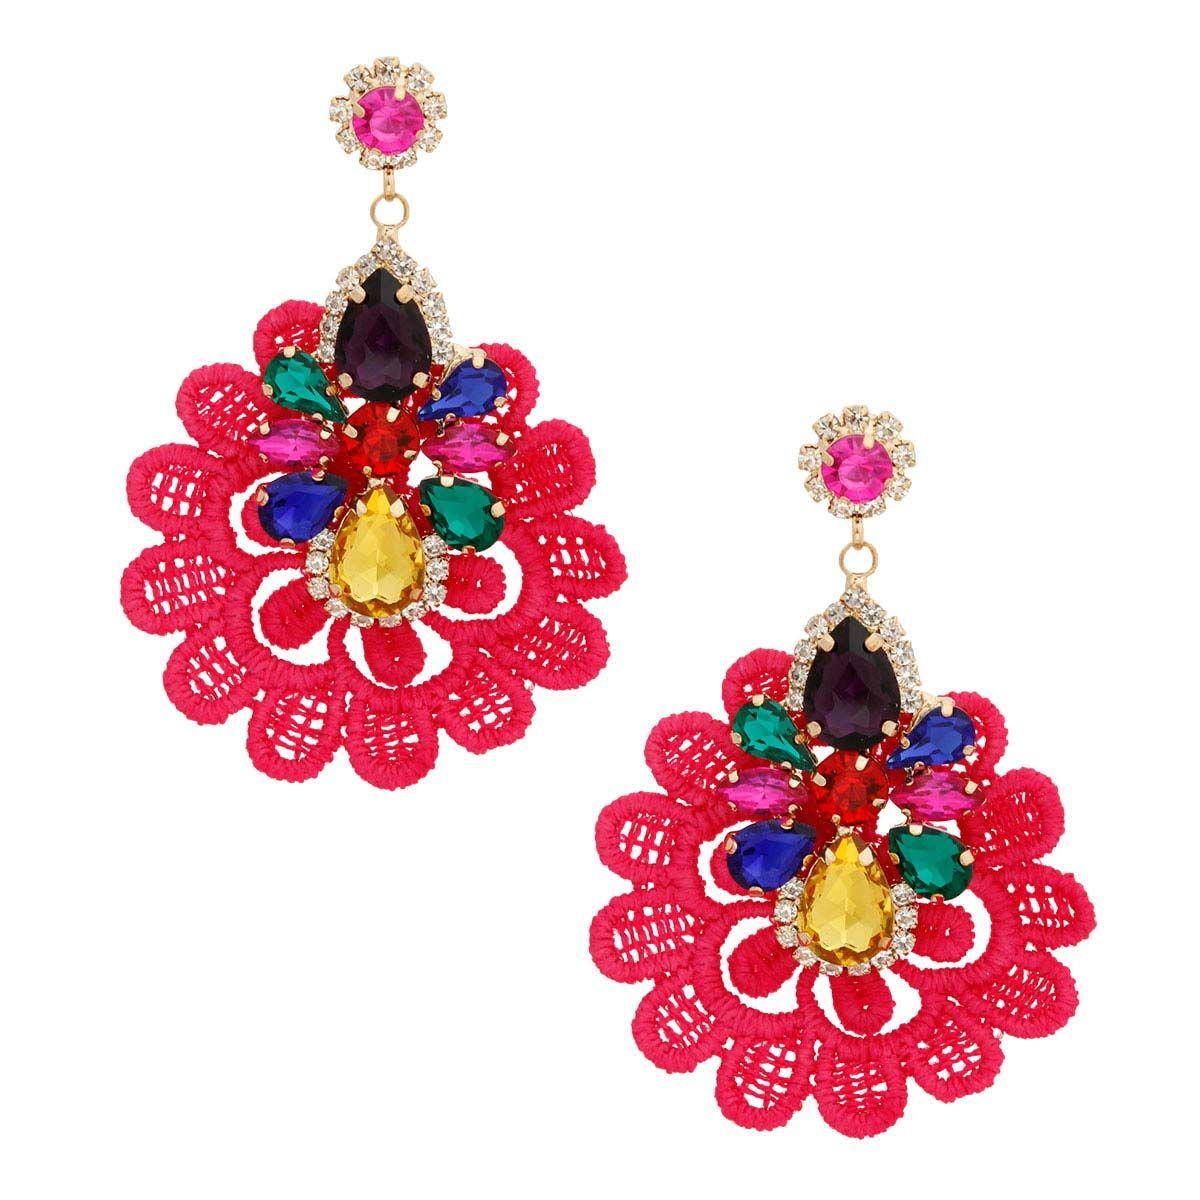 Colorful Faux Gems and Textile Earrings